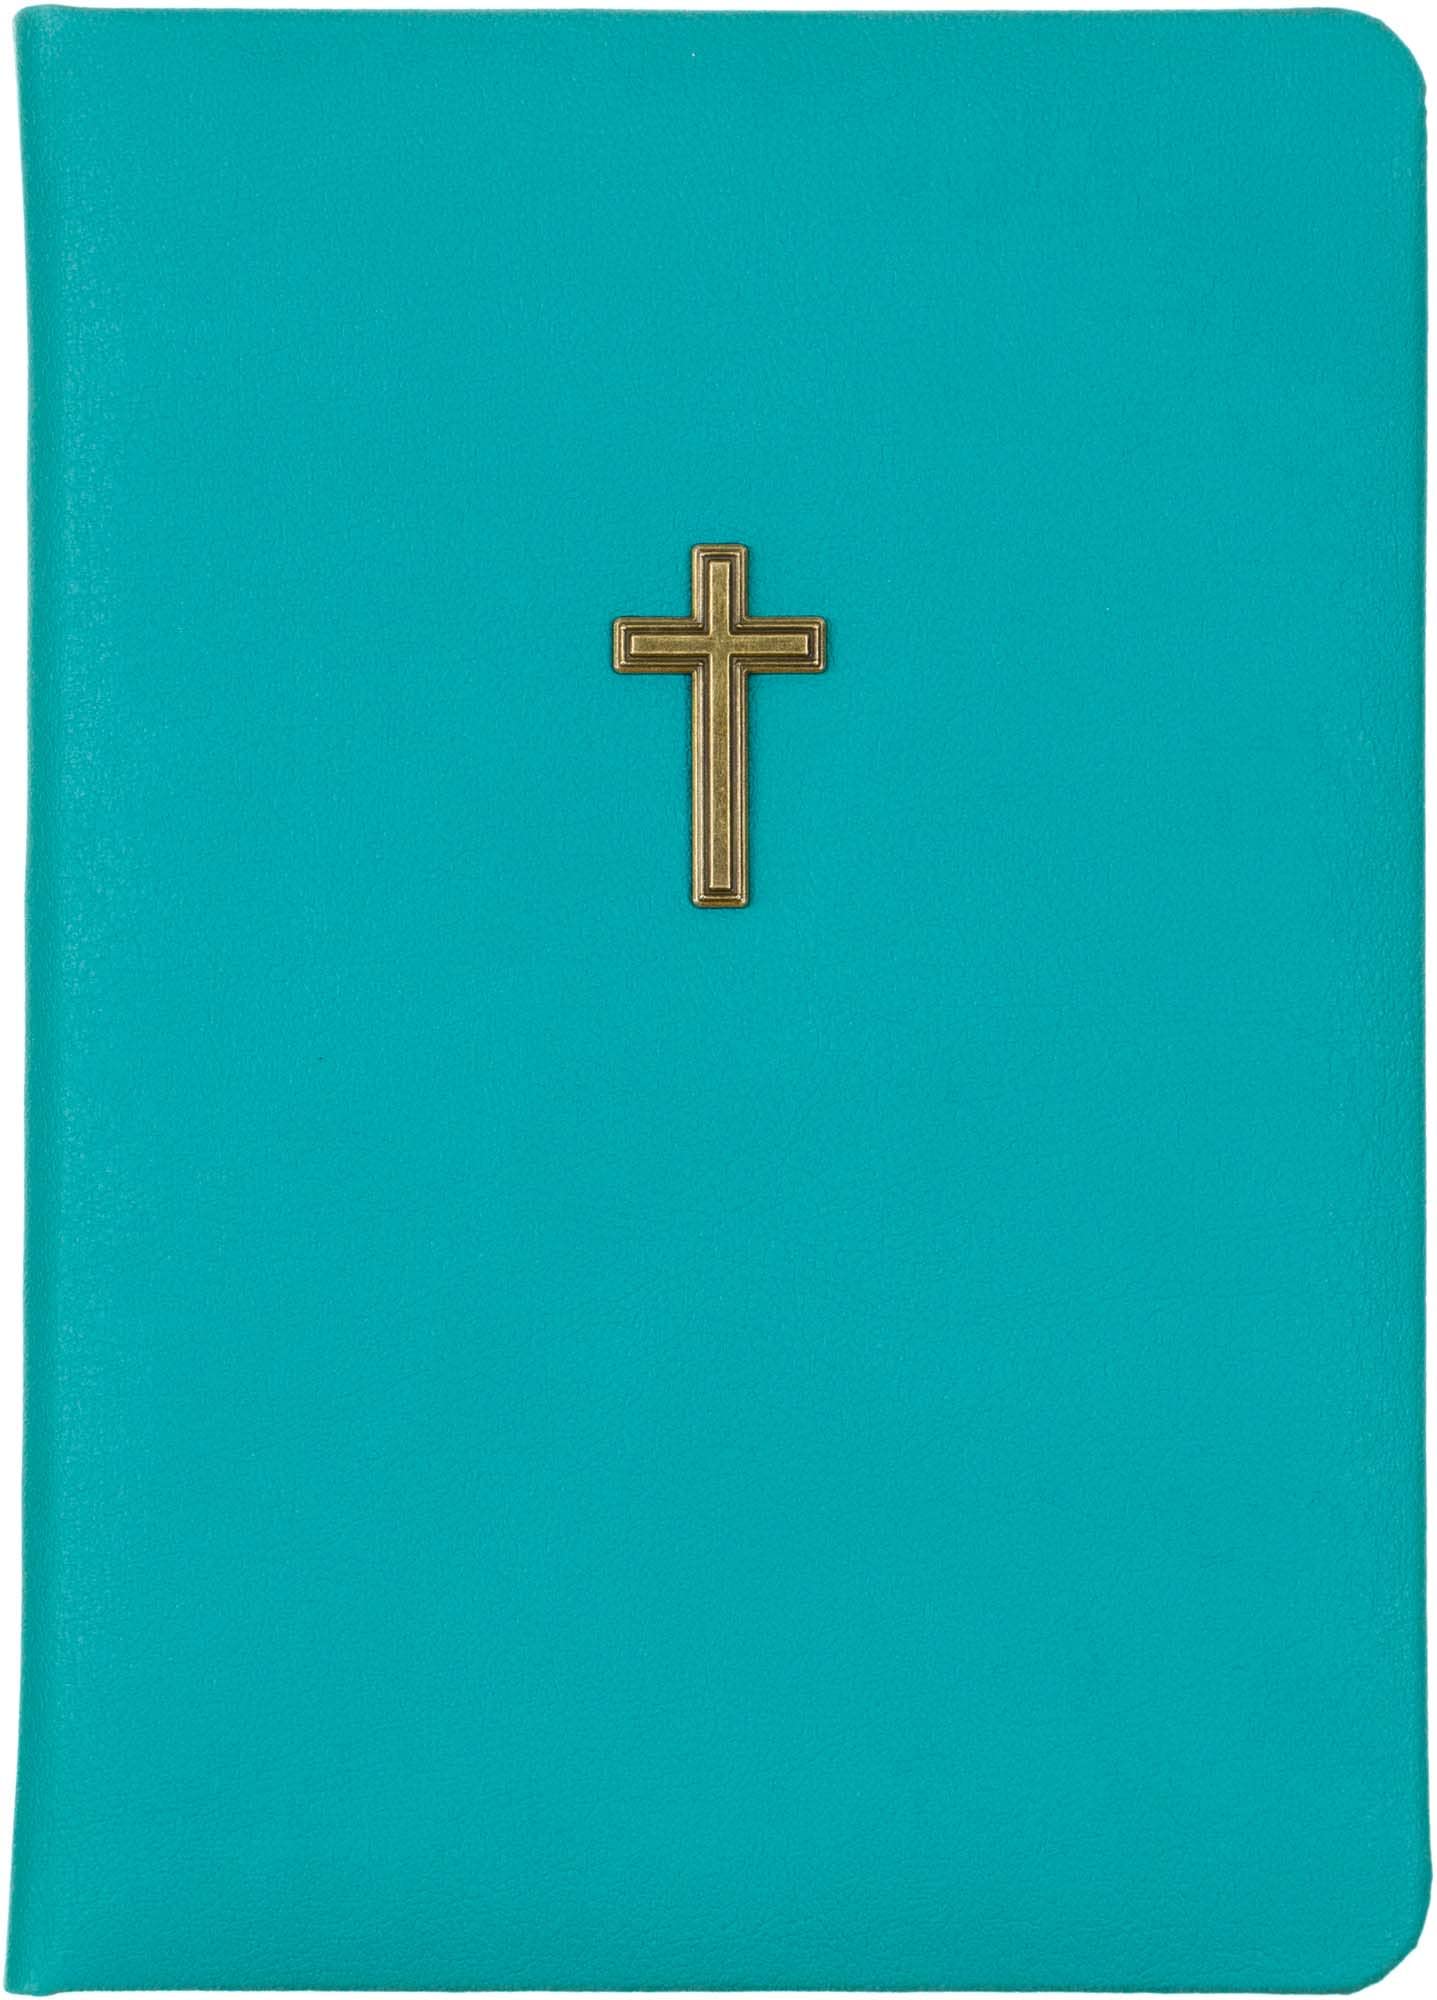 Eccolo Blank Lined Journal Notebook with Cross Emblem